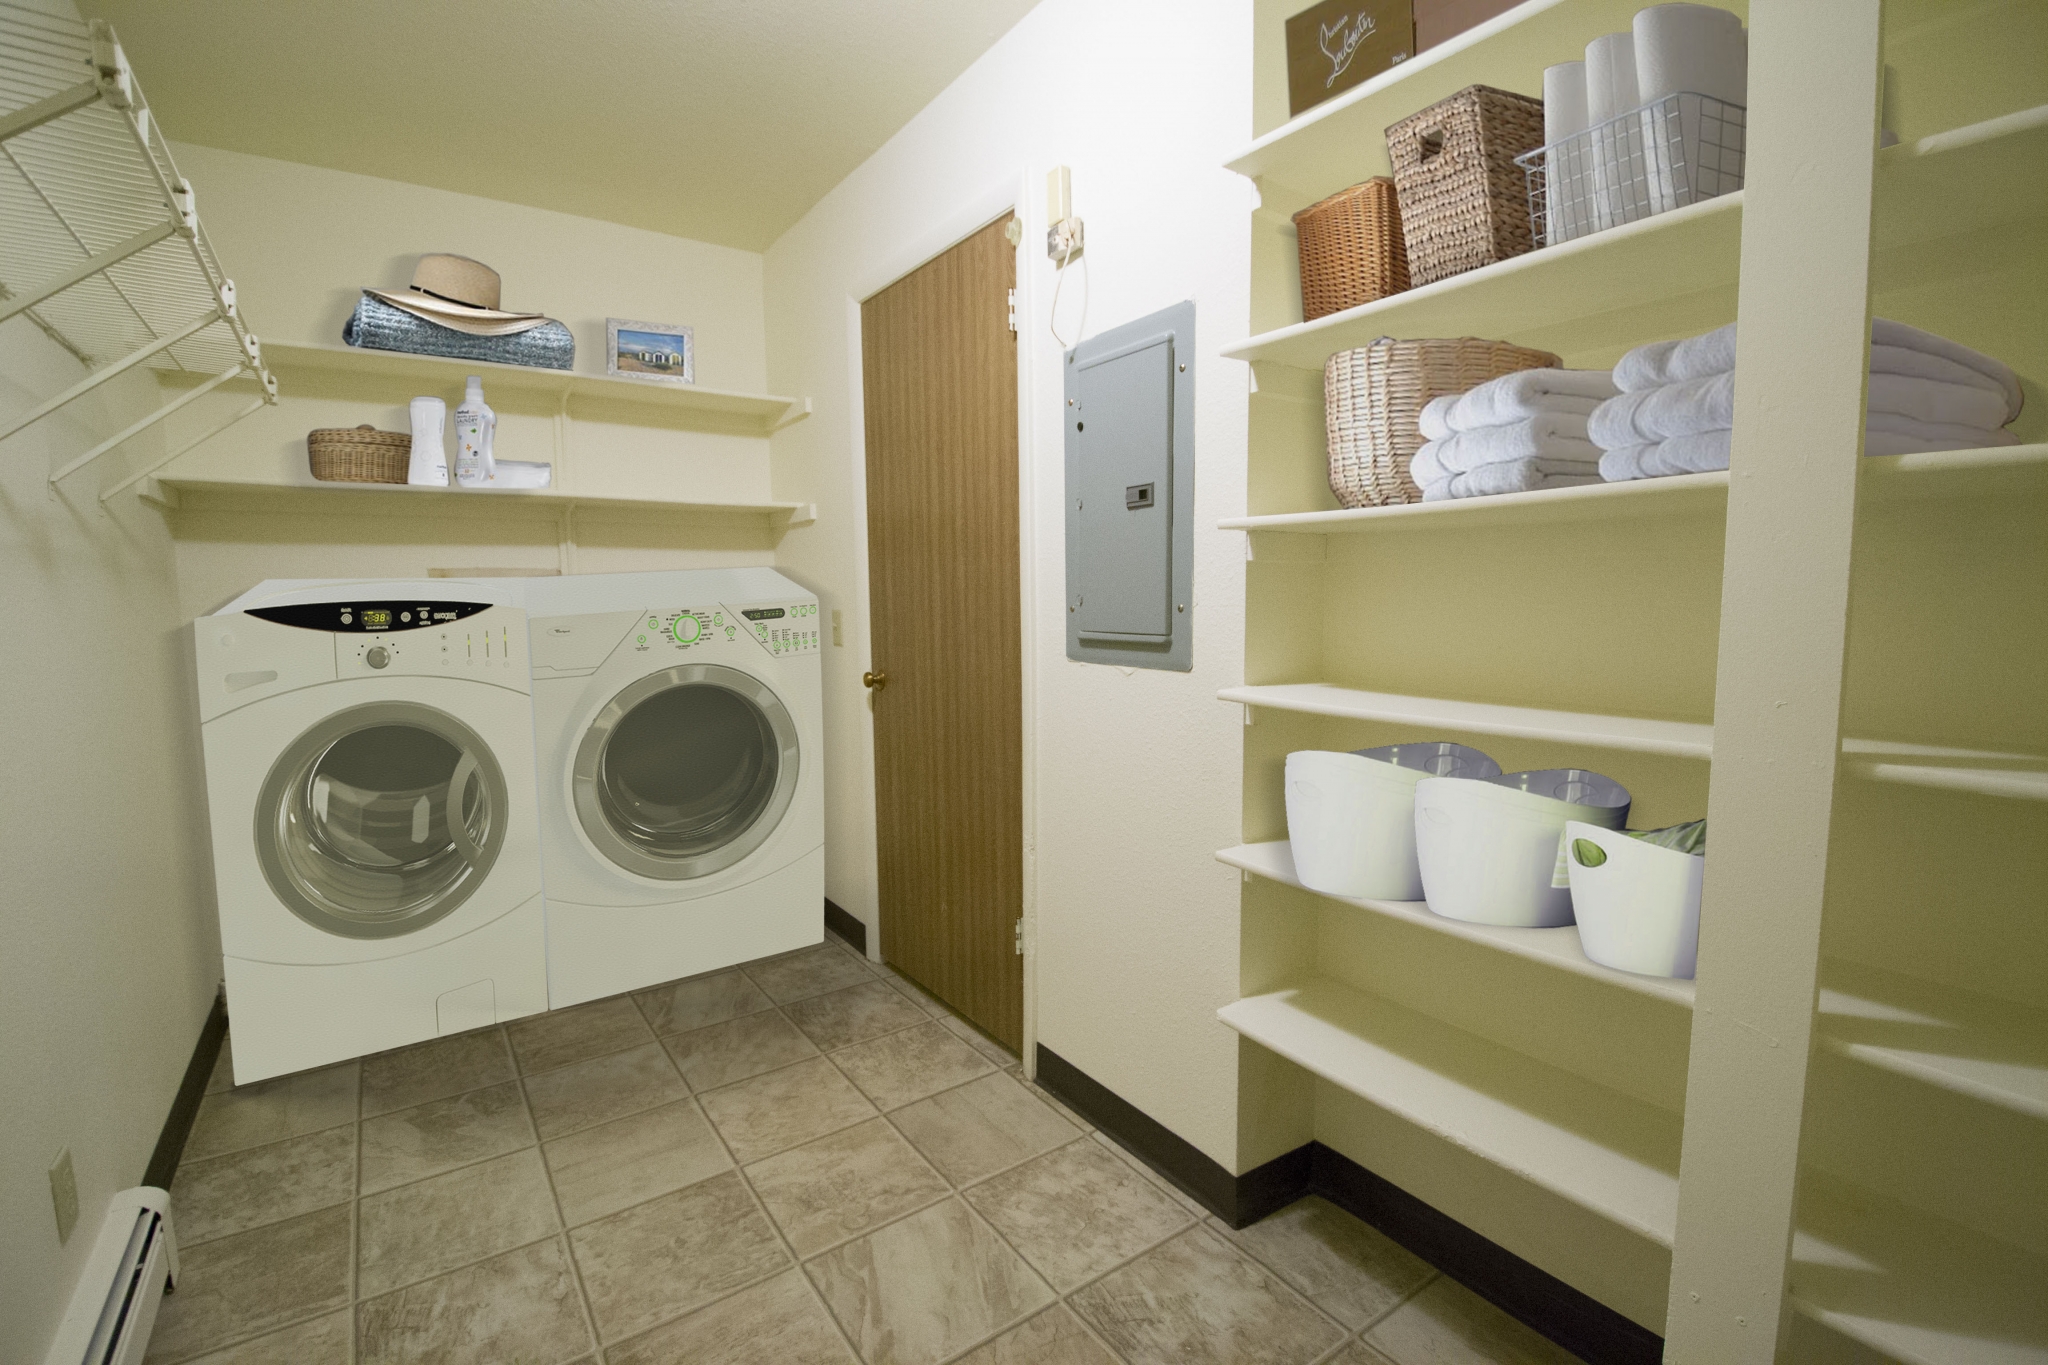 Laundry and Storage Room | Fort Drum Housing